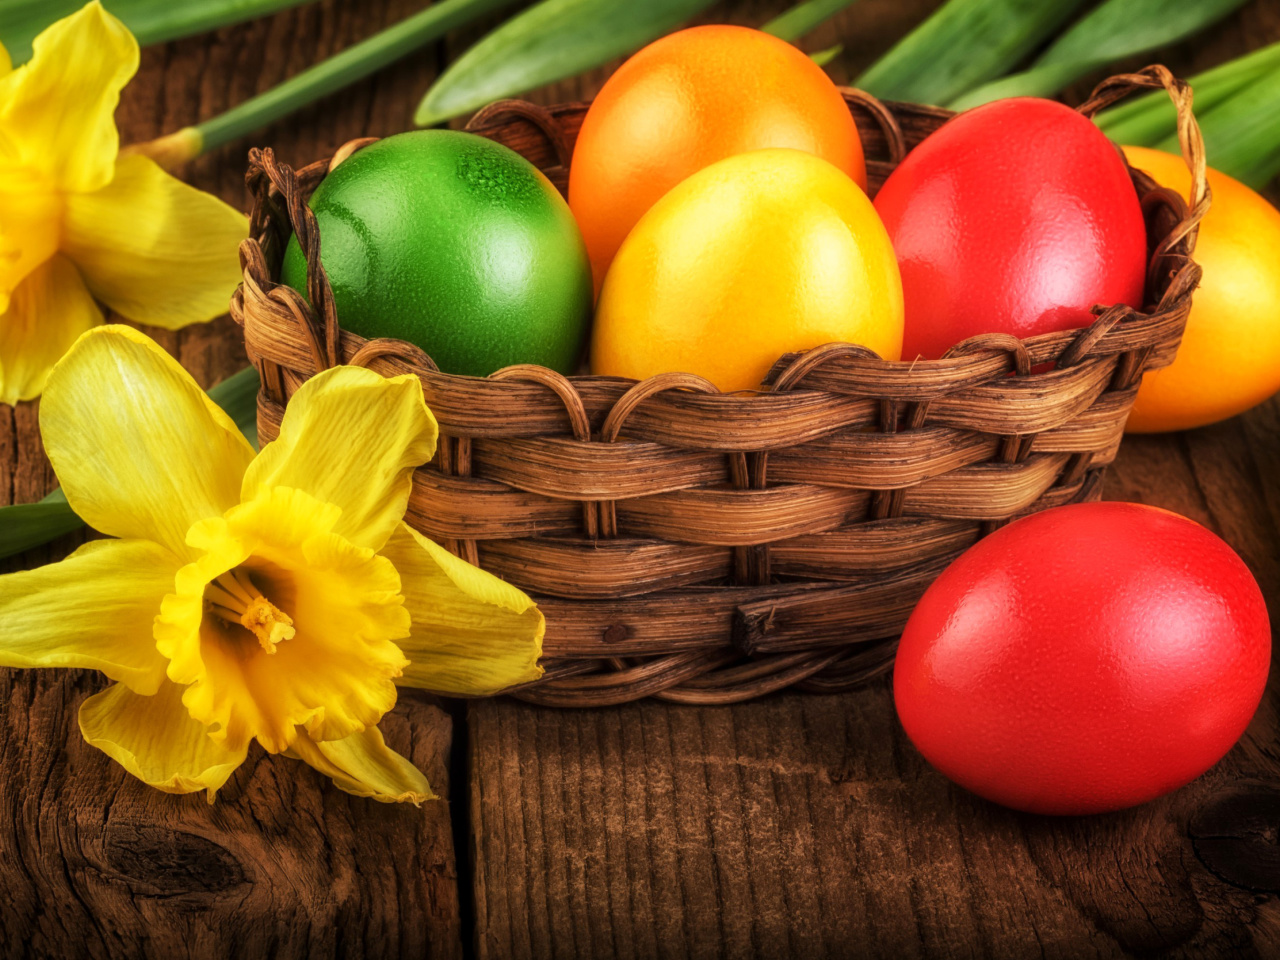 Daffodils and Easter Eggs wallpaper 1280x960